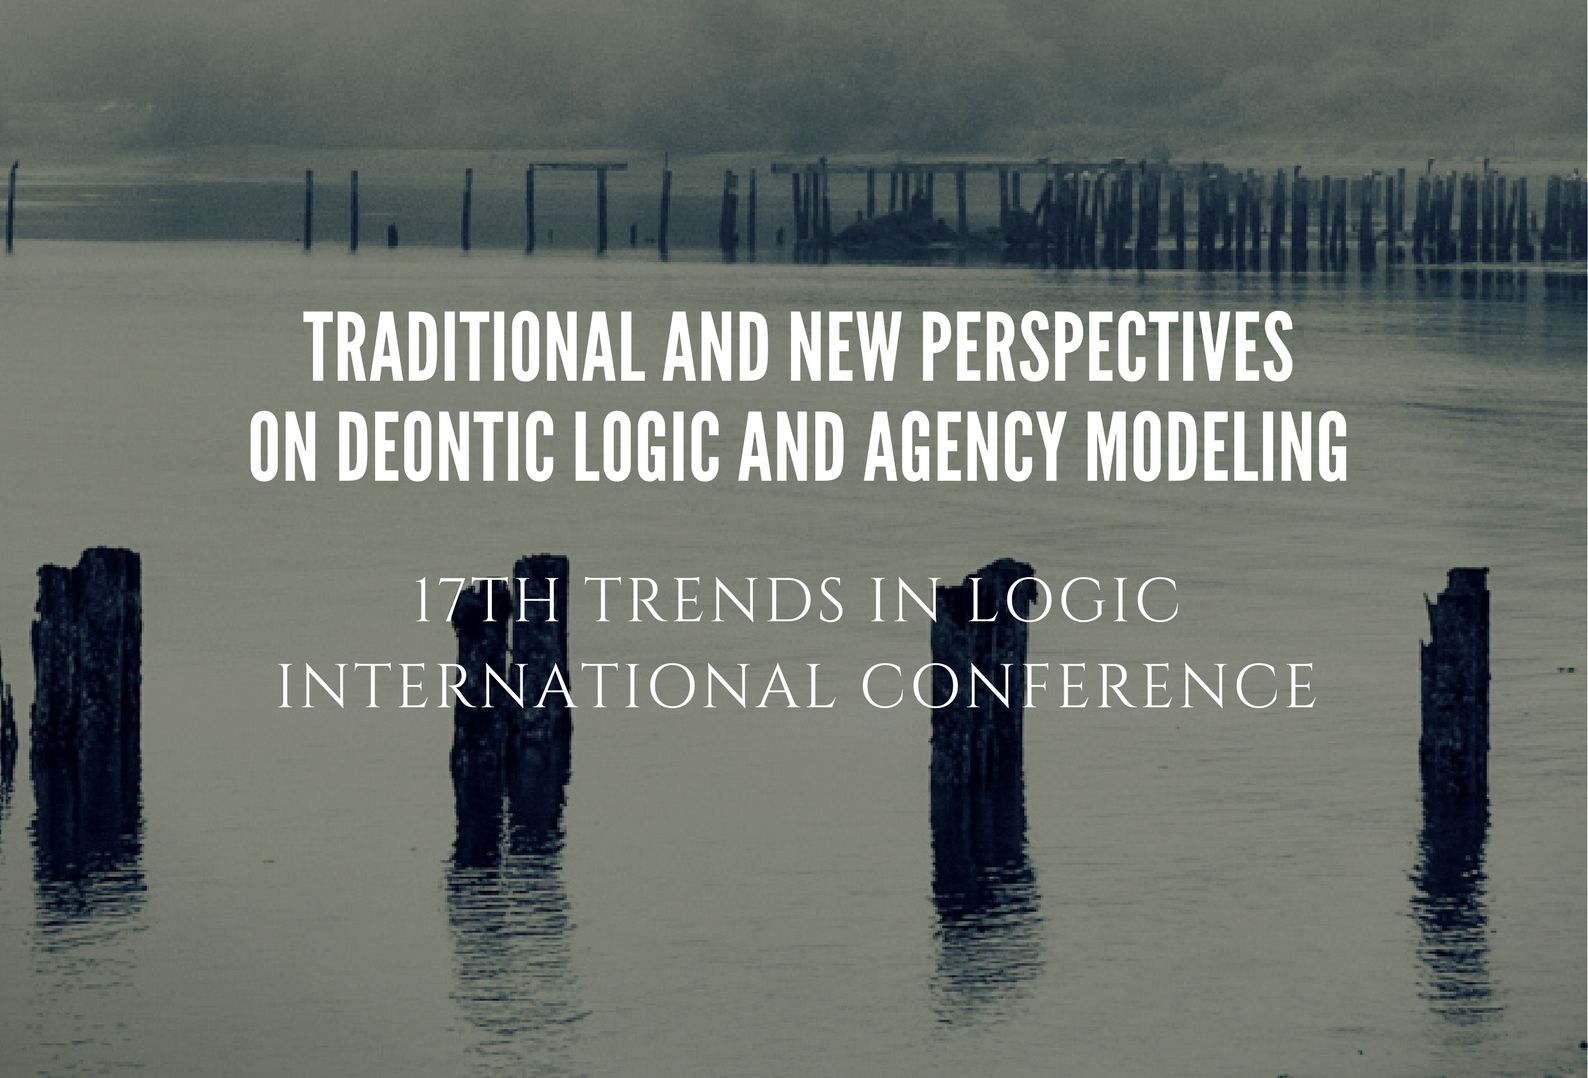 Trends in Logic XVII - Traditional and new perspectives on deontic logic and agency modeling